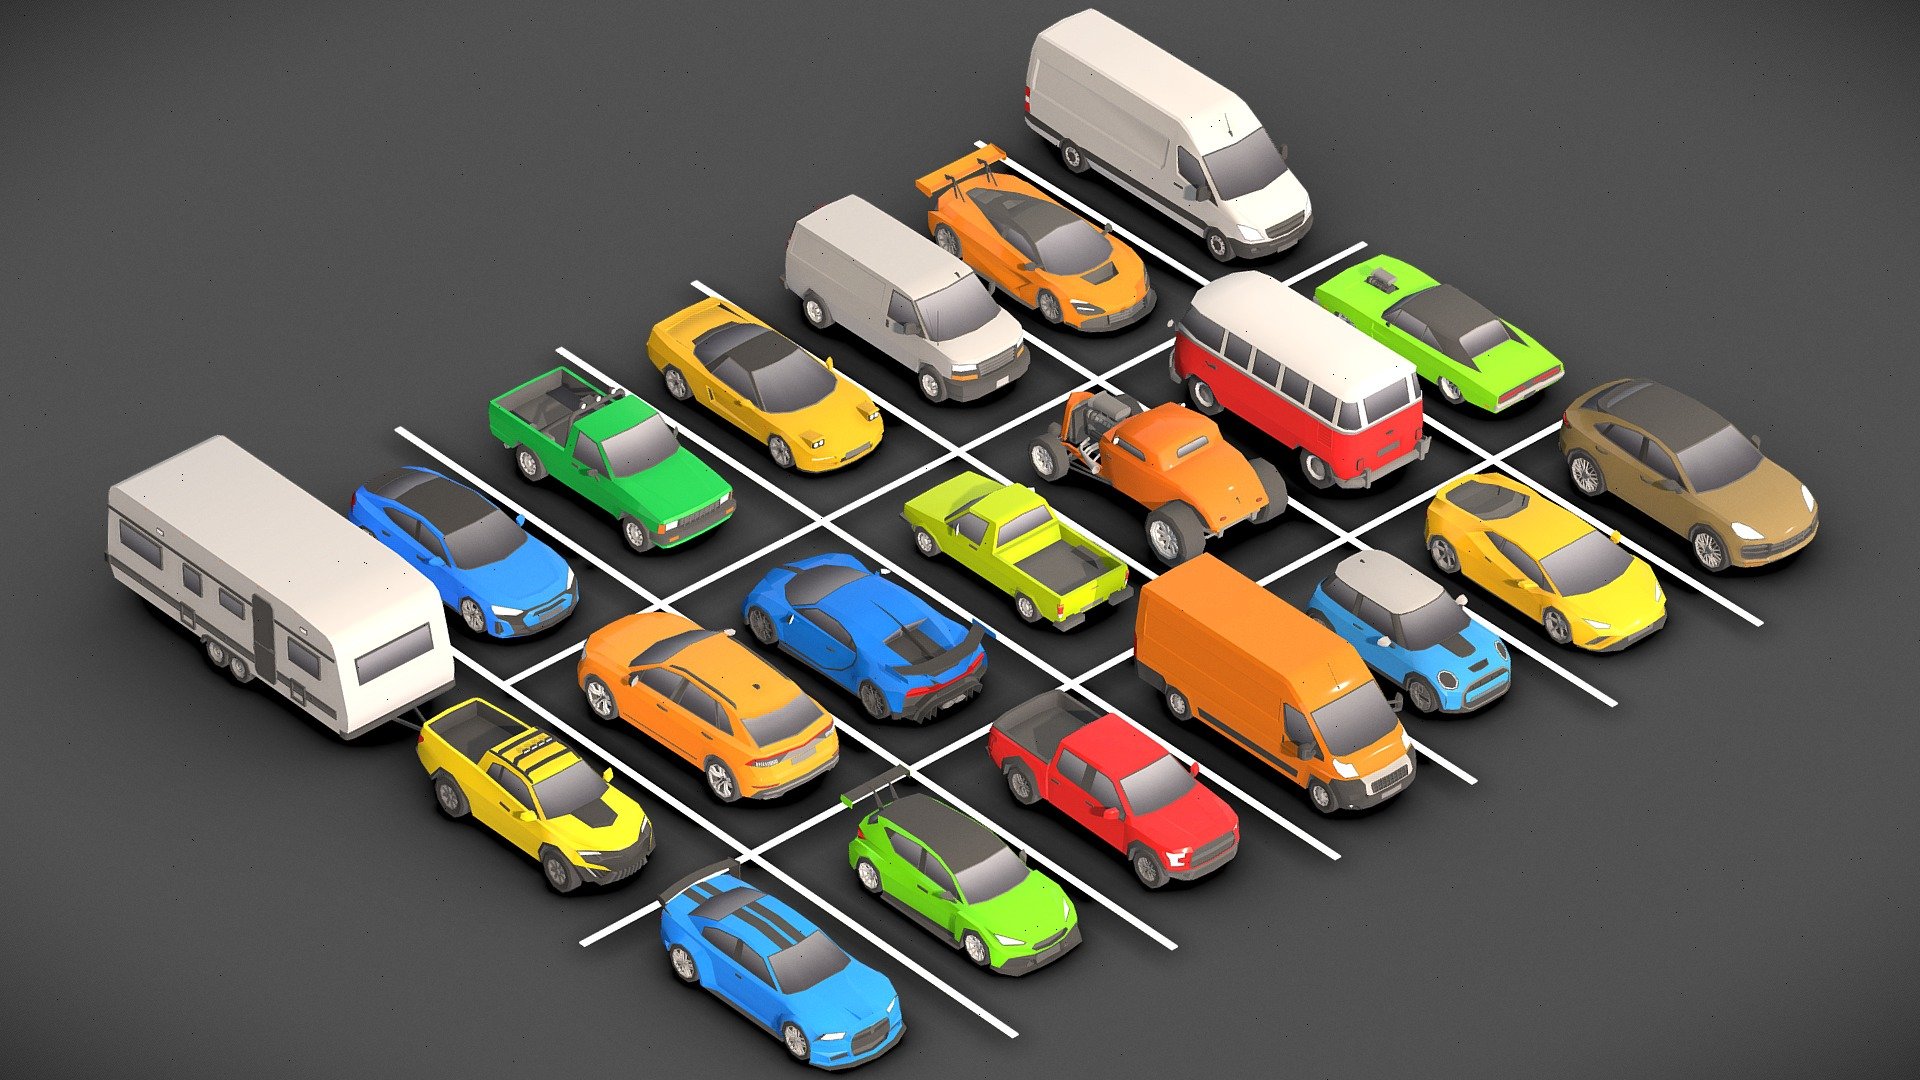 Low- Poly Cars Pack # 1.

You can use these models in any game and project.

This package includes 20 car .

This model is made with order and precision.

The color of the body can be changed.

Separated parts (body. wheel).

Very low poly.

1000 - 4000 triangles per car.

Texture size: 256 (PNG).

Number of textures: 1.

Number of materials: 1.

format: fbx, obj, 3d max - Low- Poly Cars Pack # 1 - Buy Royalty Free 3D model by Sidra (@Sidramax) 3d model